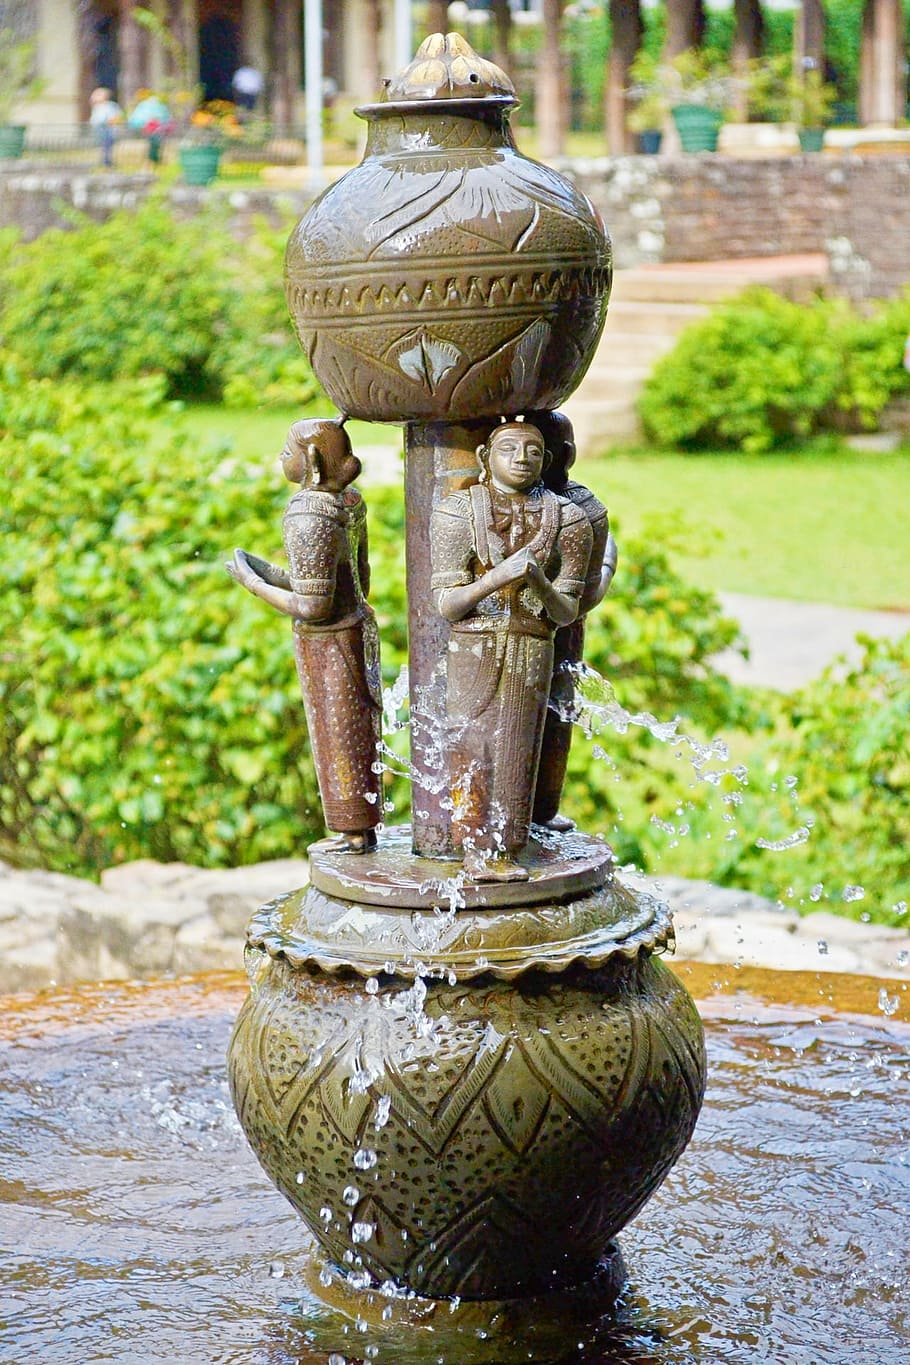 fountain, palace, sri lanka, temple of the tooth, kandy, ceylon, cultures, decoration, architecture, art and craft